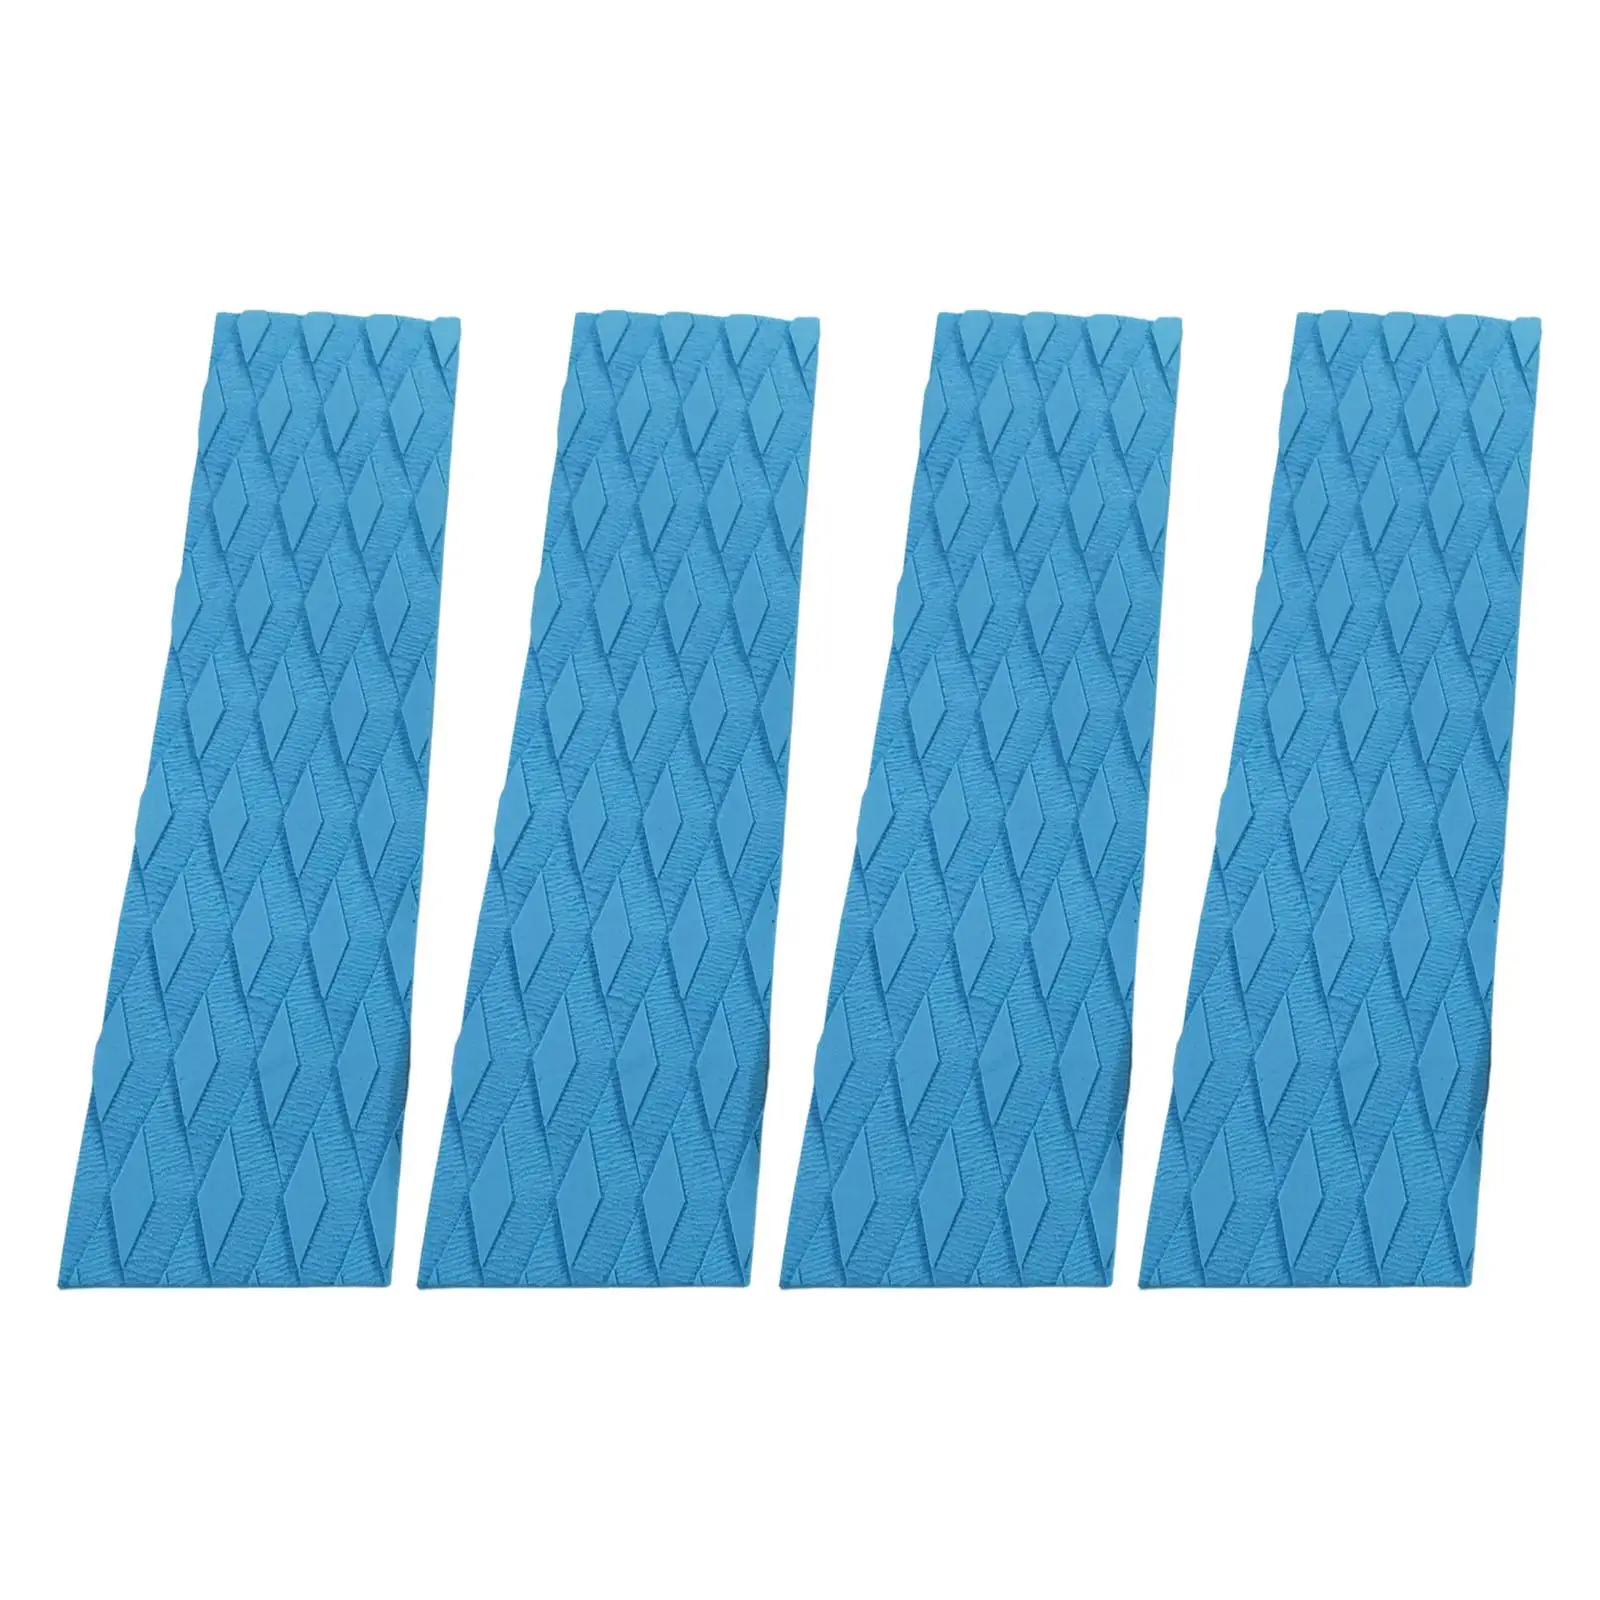 4 Pieces EVA Surfing Surf Skimboard Surfboard Traction Pad Bar Grips Sky Blue/Grey for Longboard Boayboard Accessories